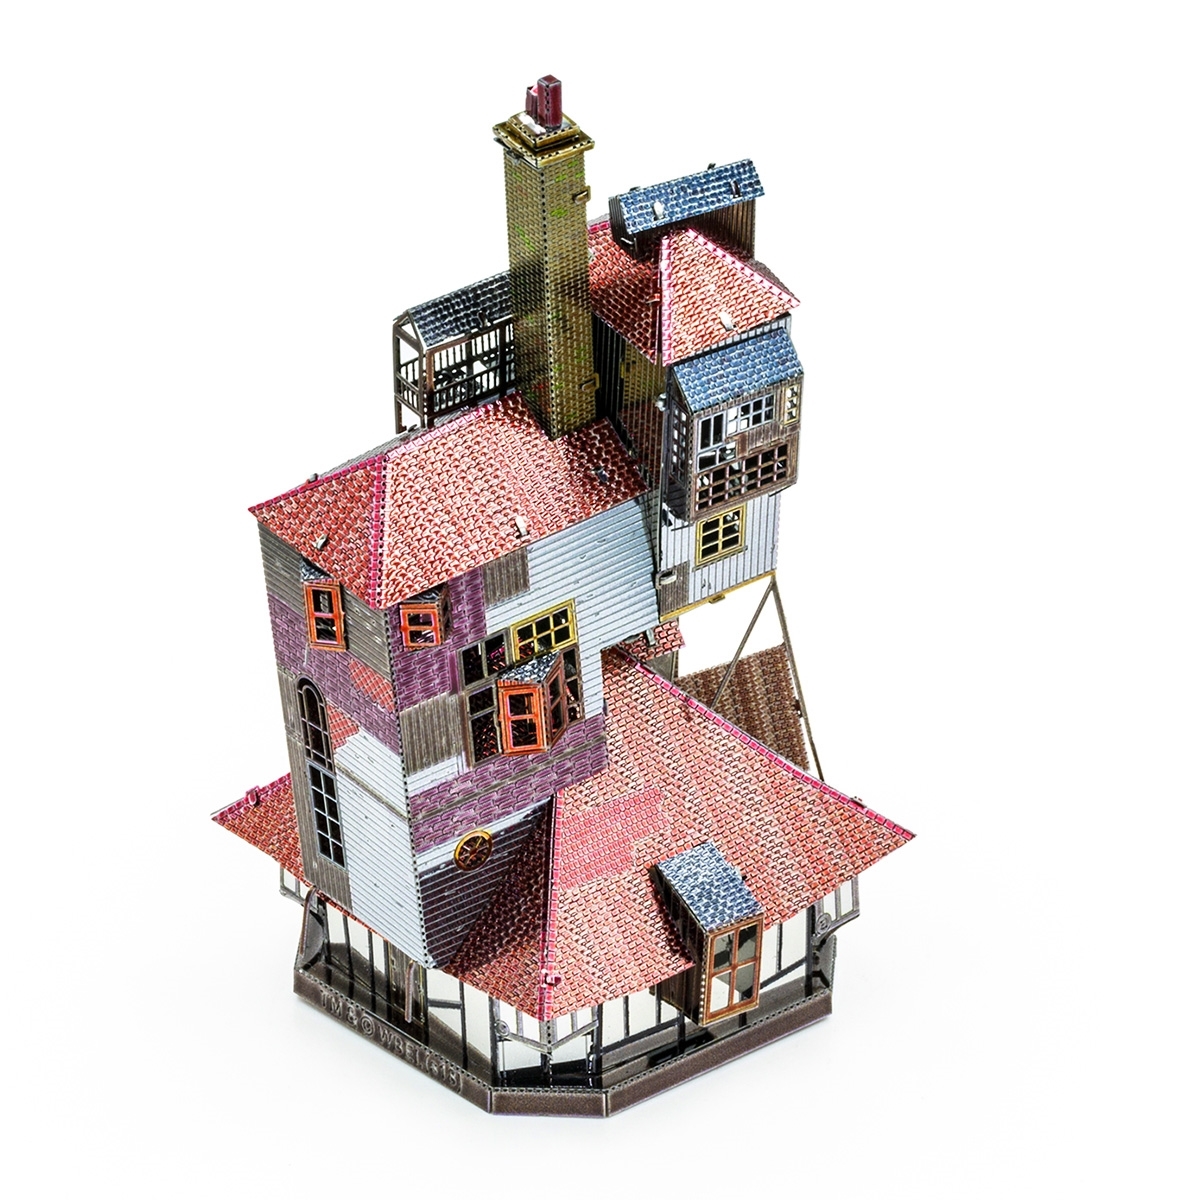 Metal Earth 3D Metal Model Kit - Harry Potter The Burrow (Weasley Family  Home) 